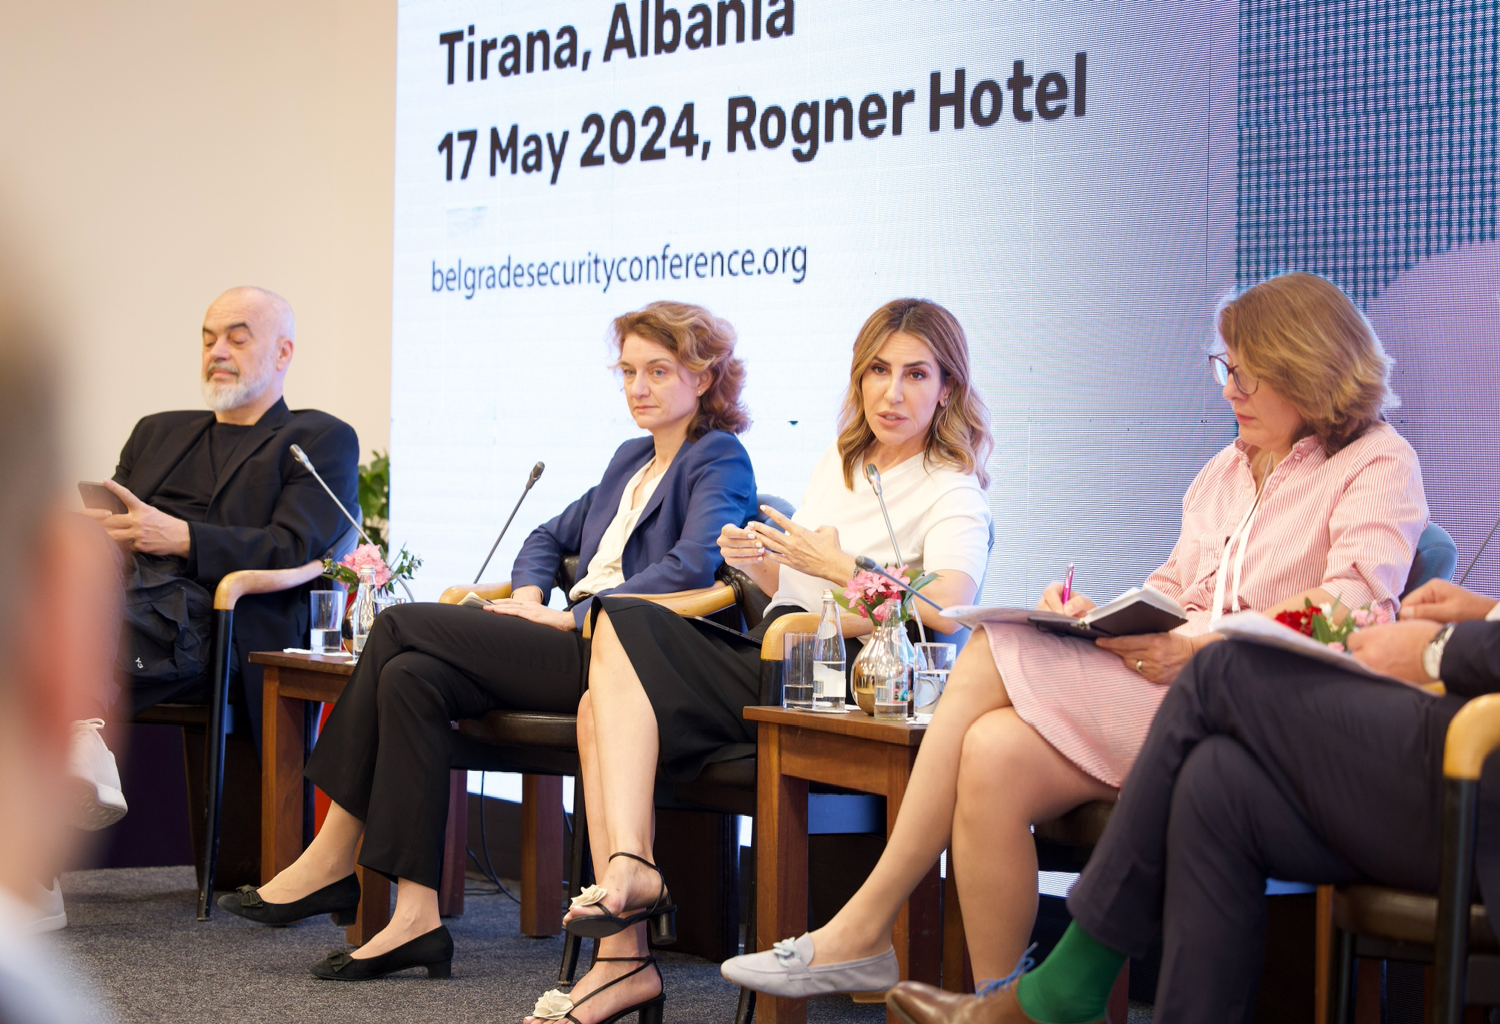 RCC Secretary General speaking at the Belgrade Security Conference (BSC) Leaders Meetings Discussion, in Tirana on 17 May 2024 (Photo: RCC/Henri Koci)